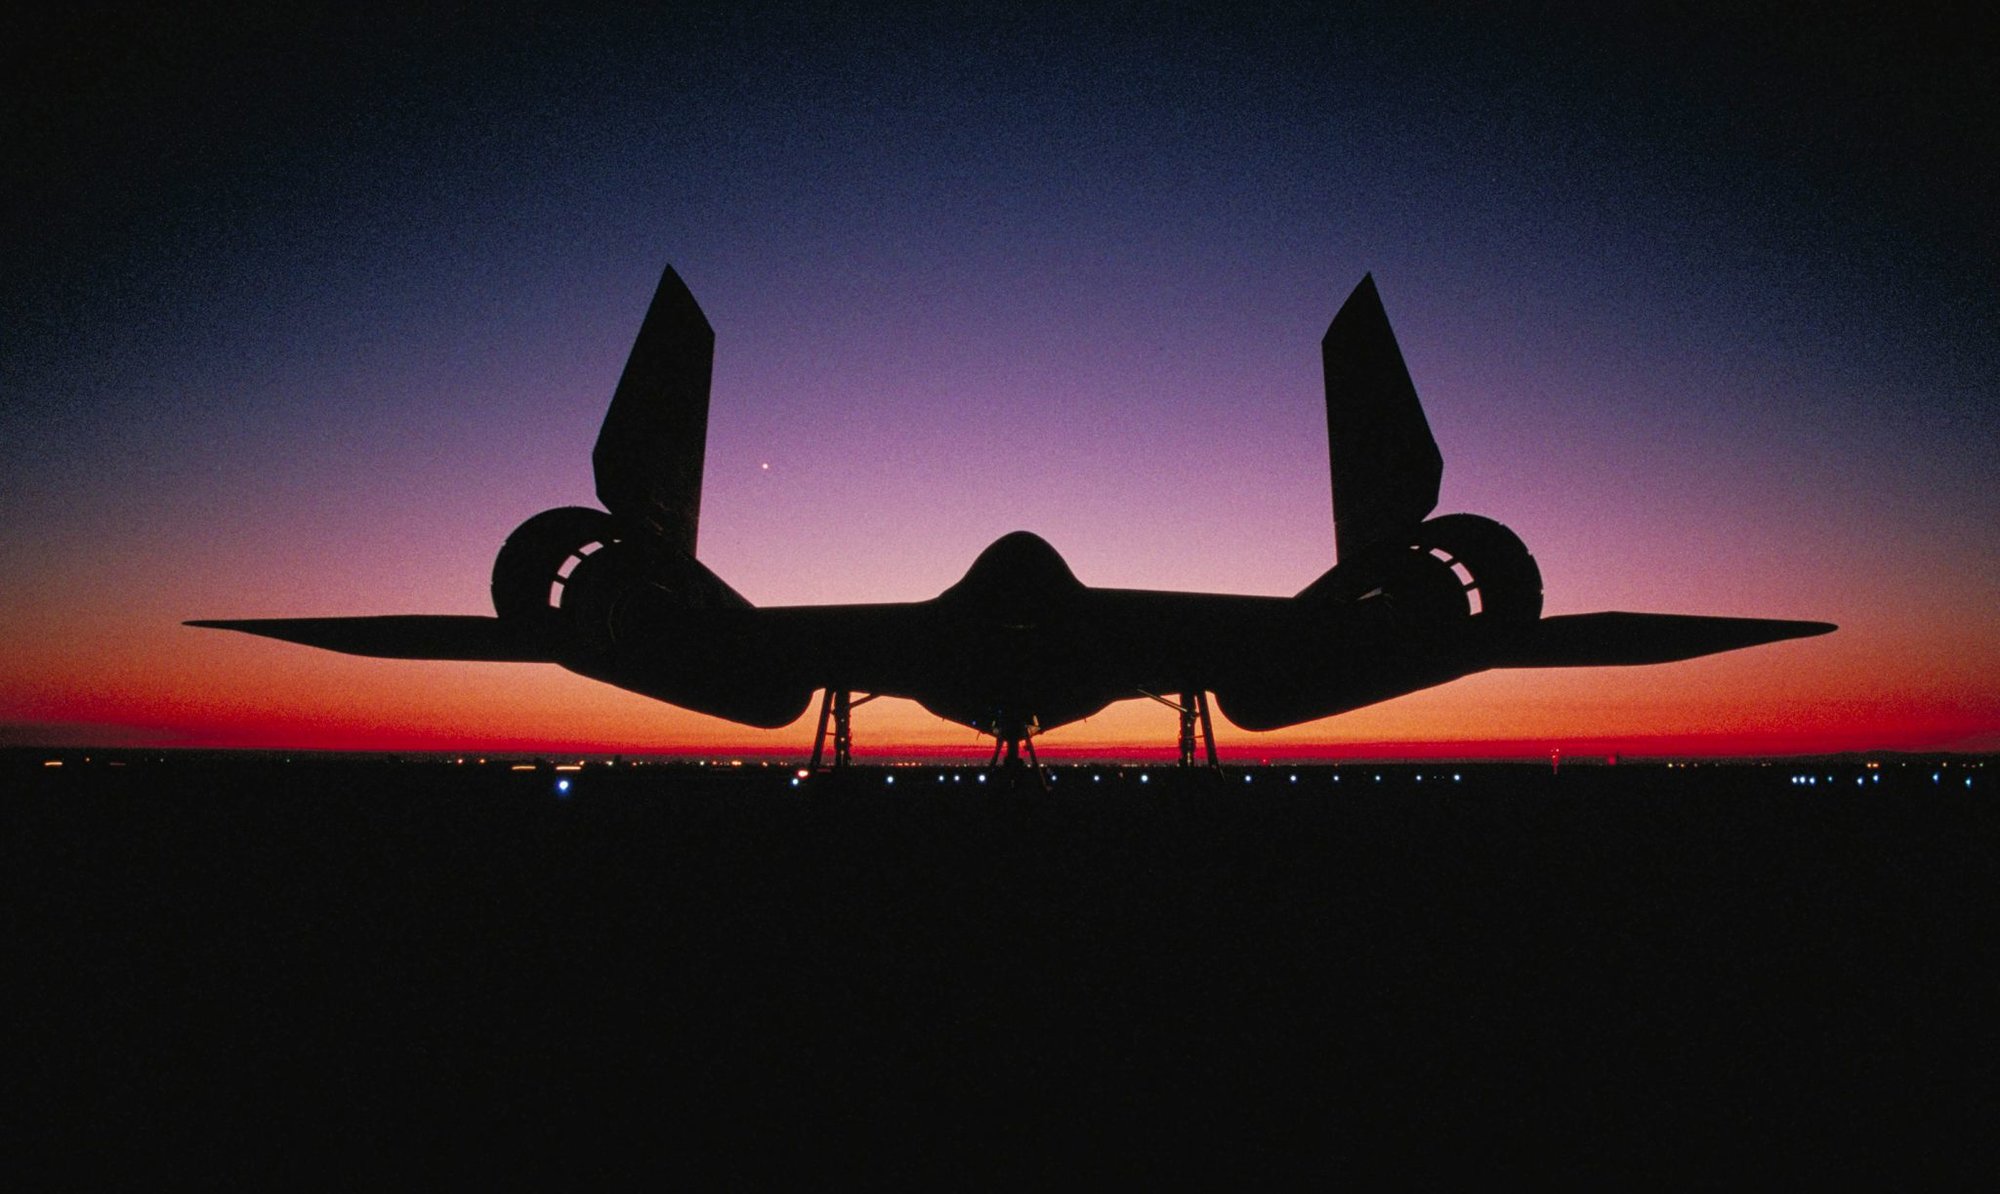 The SR-71 Blackbird was one of many of Clarence “Kelly” Johnson’s “impossible” creations. Photo courtesy of Lockheed Martin.